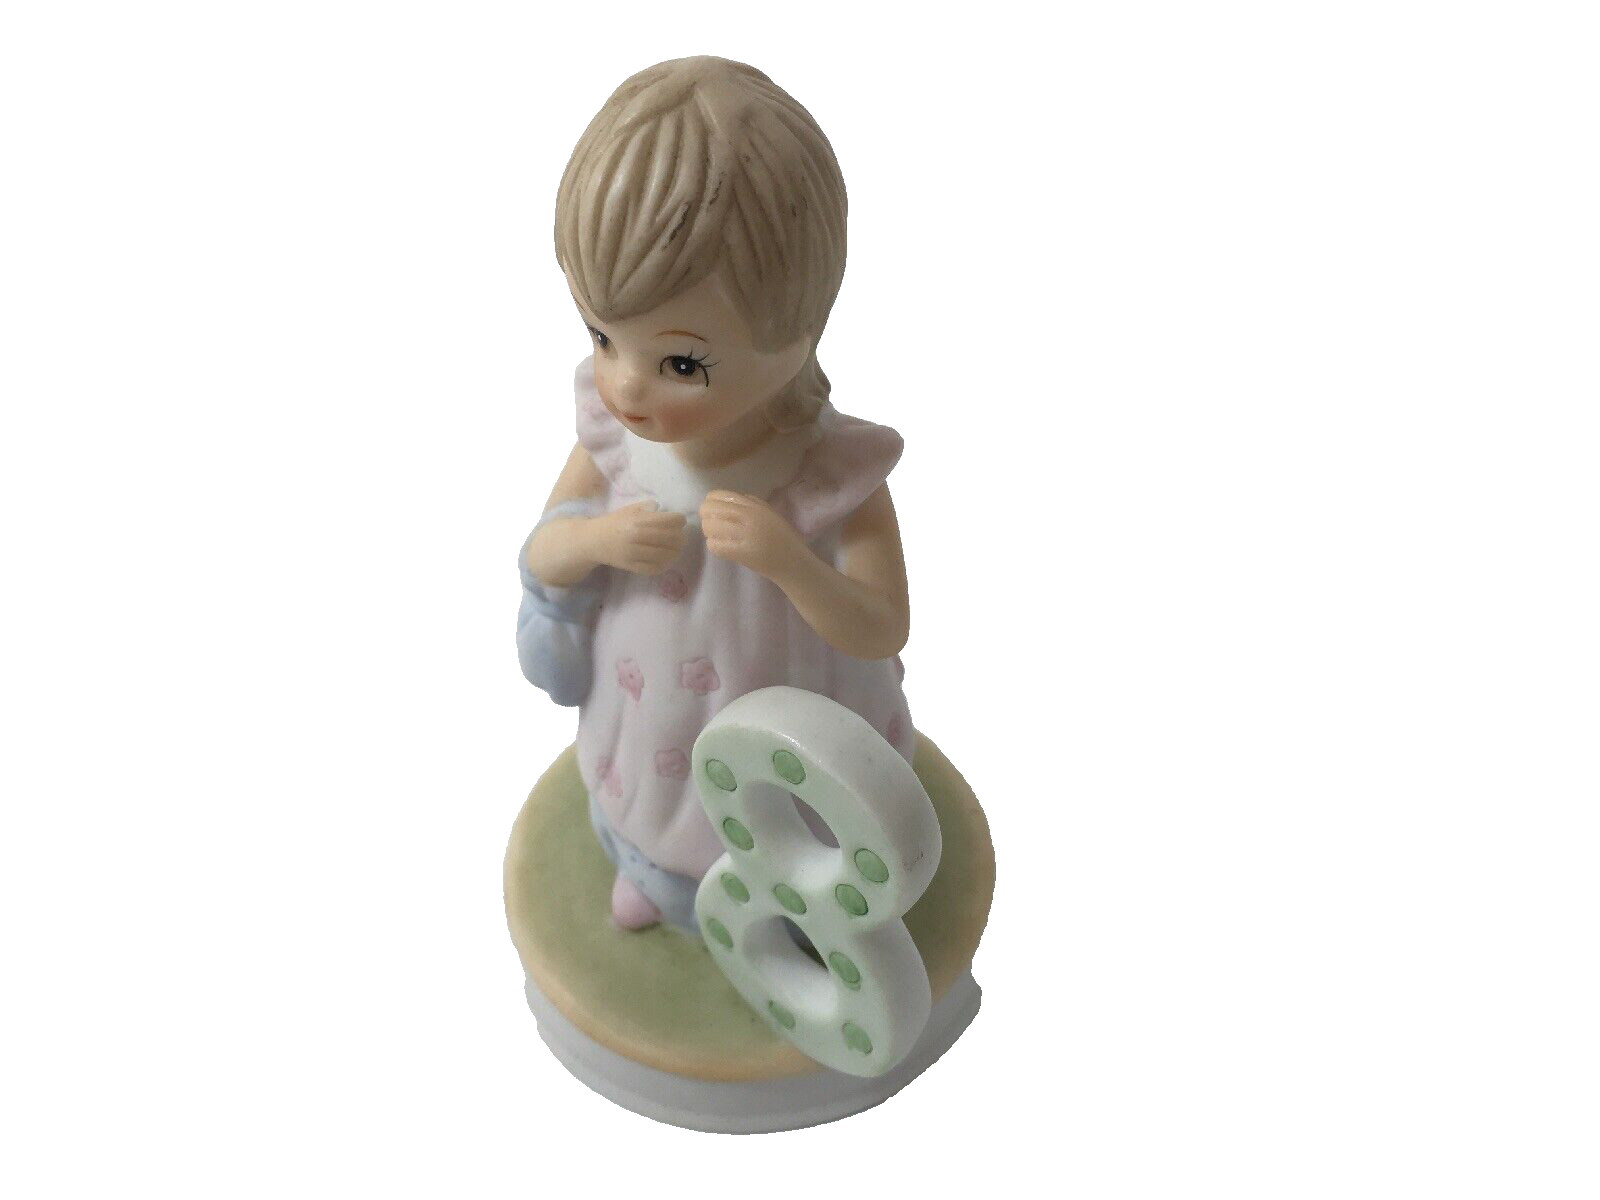 Primary image for Geo Z Lefton The Christopher Collection Birthday Girl Figurine Age 8 03448H